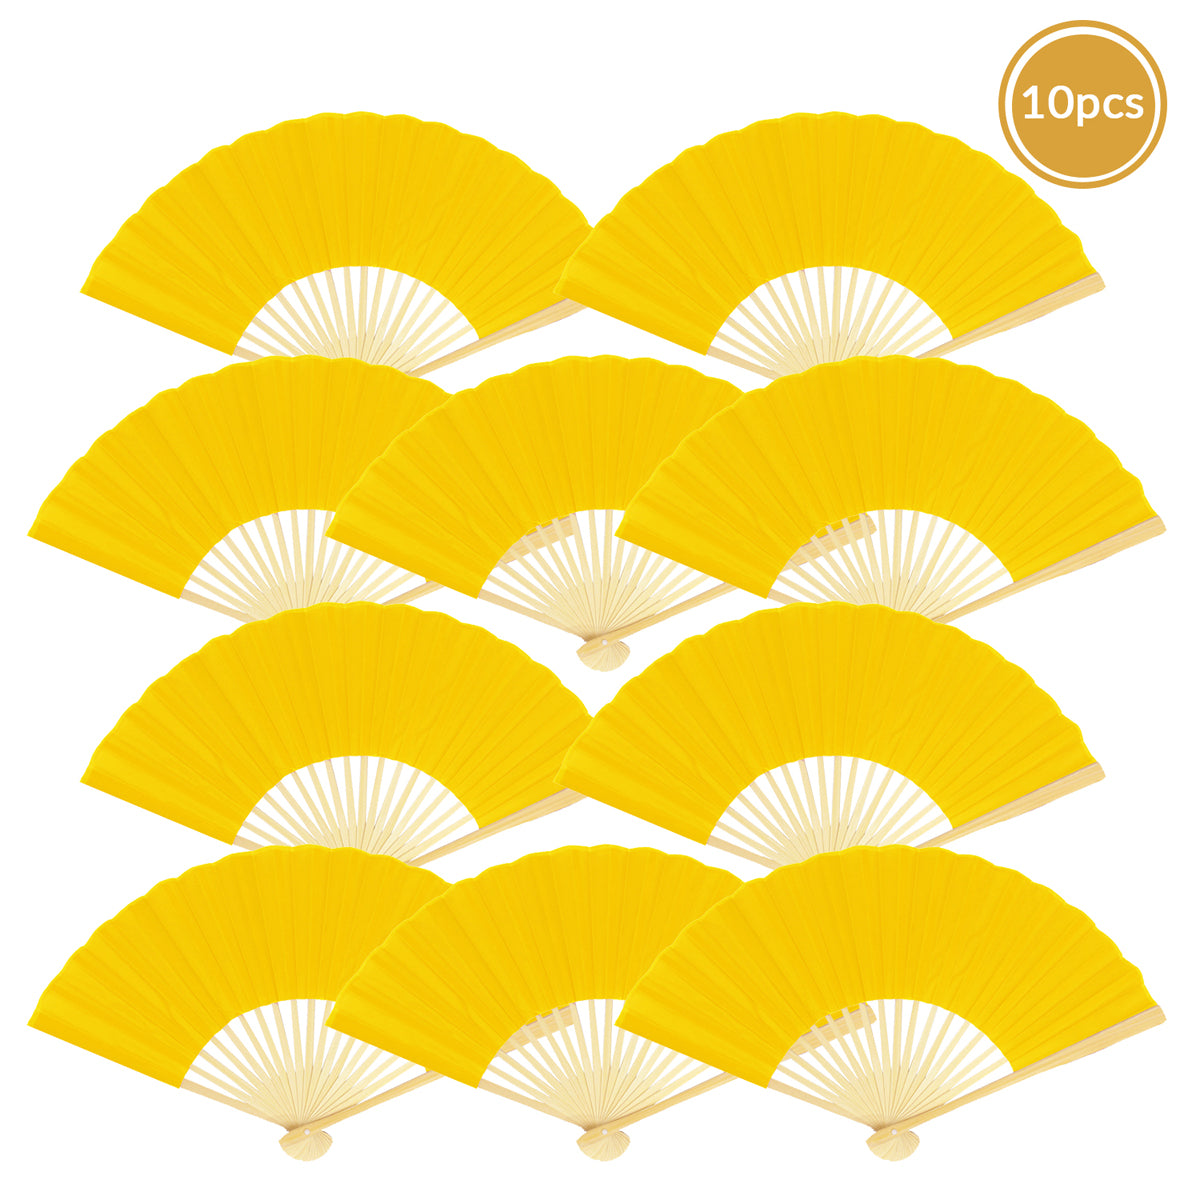 9 Inch Yellow Silk Hand Fans For Weddings 10 Pack On Sale Now Oriental Paper Folding Wedding Hand Fans Cheap On Sale At Bulk Wholesale Best Prices